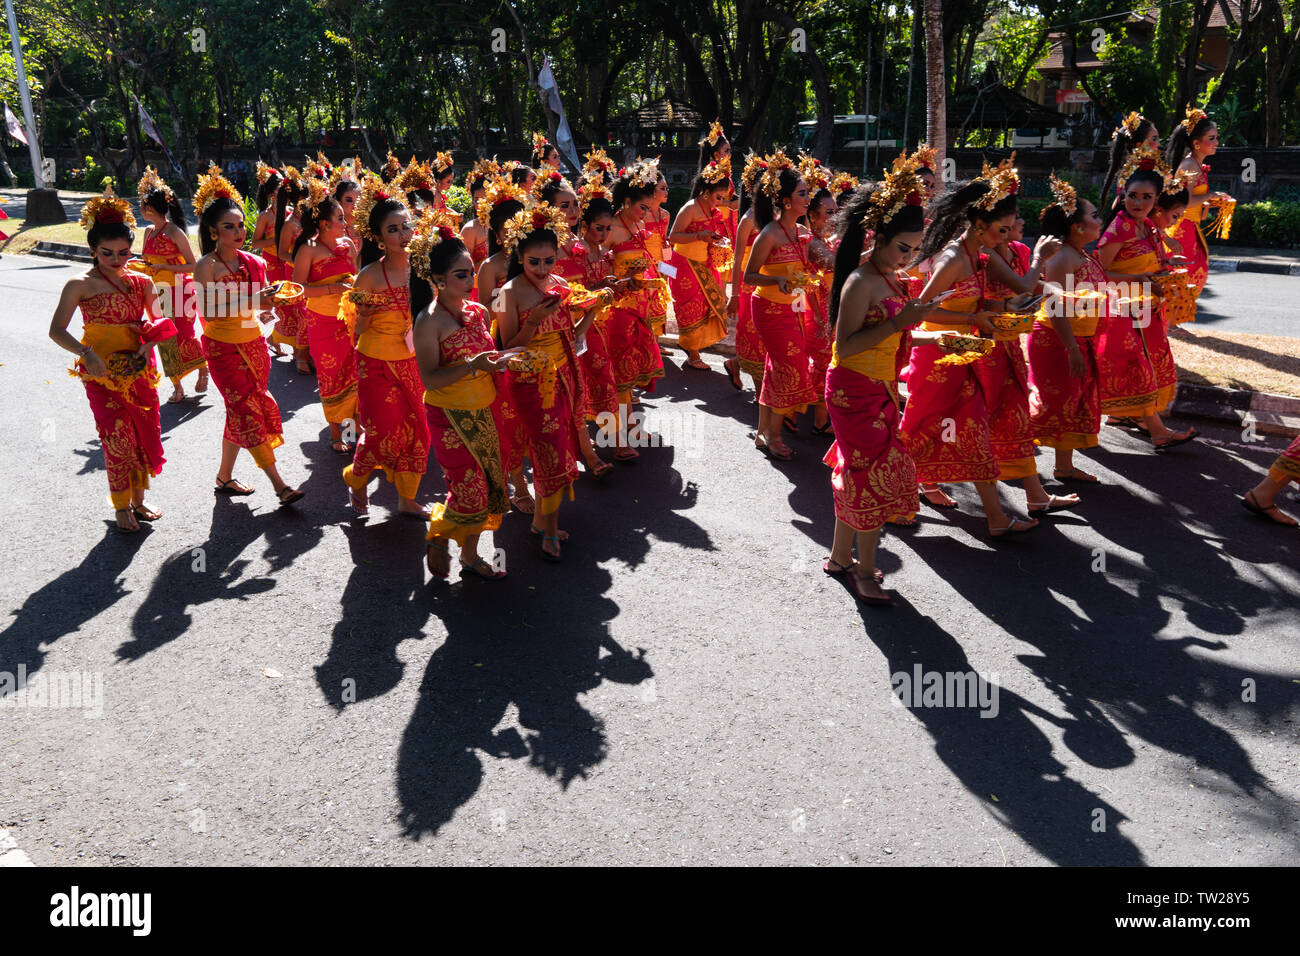 DENPASAR/BALI-JUNE 15 2019: Young Balinese women wearing traditional Balinese headdress and traditional sarong at the opening ceremony of the Bali Art Stock Photo